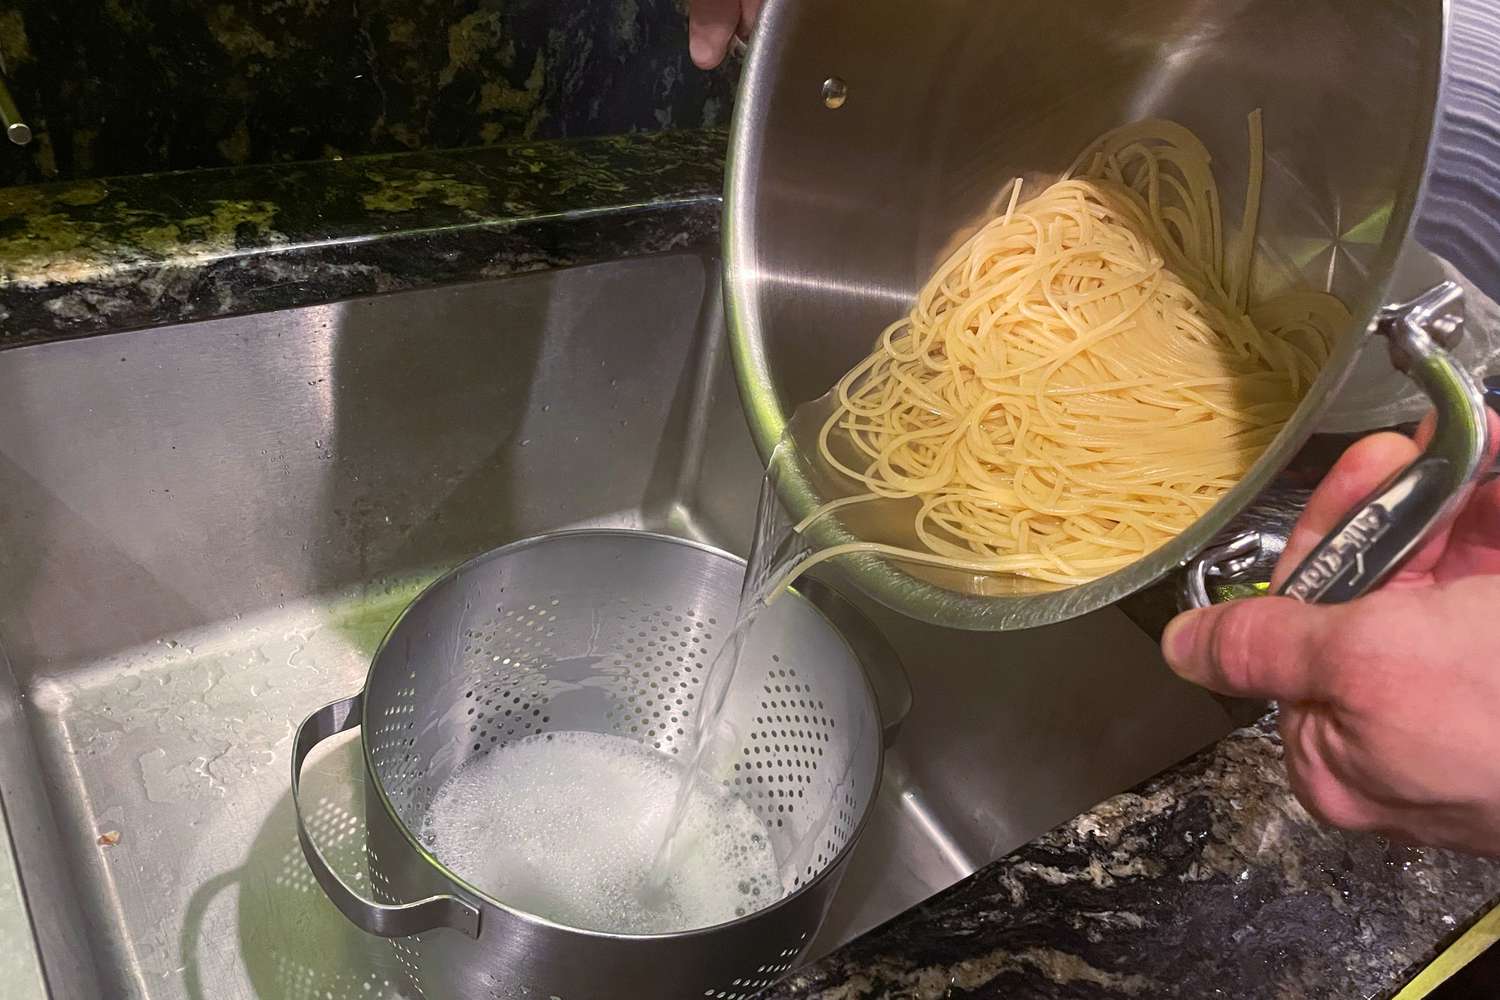 Straining cooked pasta out of the All-Clad D3 12-quart stockpot